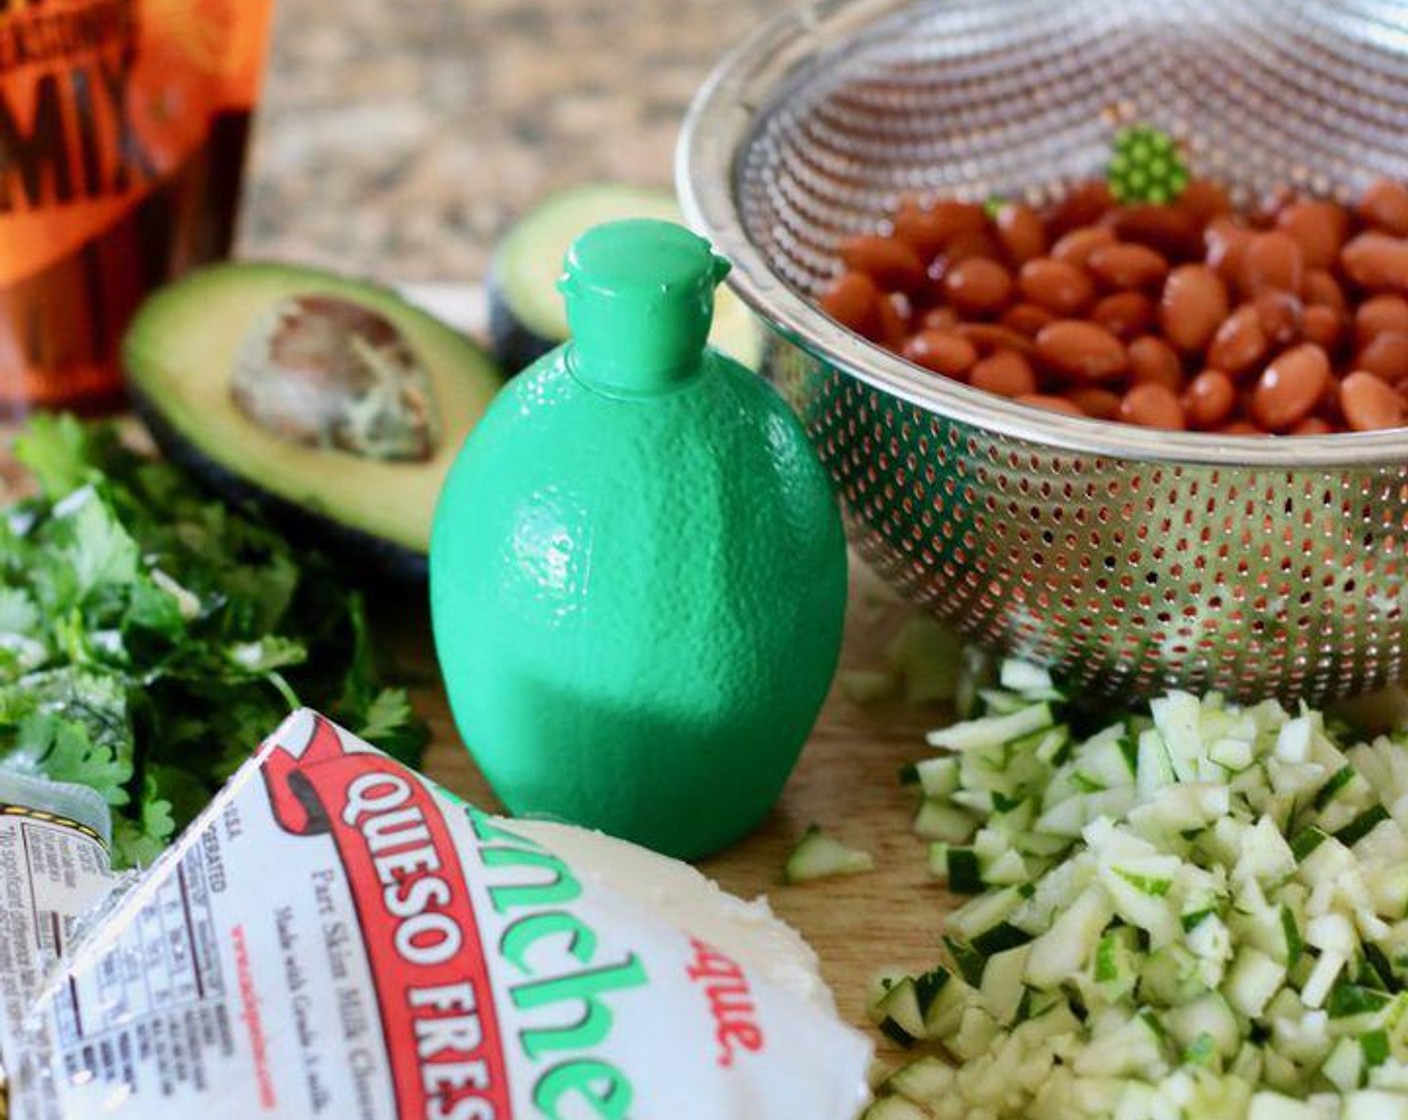 step 1 Toss the Canned Pinto Beans (1 cup), McCormick® Taco Seasoning Mix (to taste), Lime (1/2), Zucchini (1), and Mushrooms (5) in a bowl and mix.